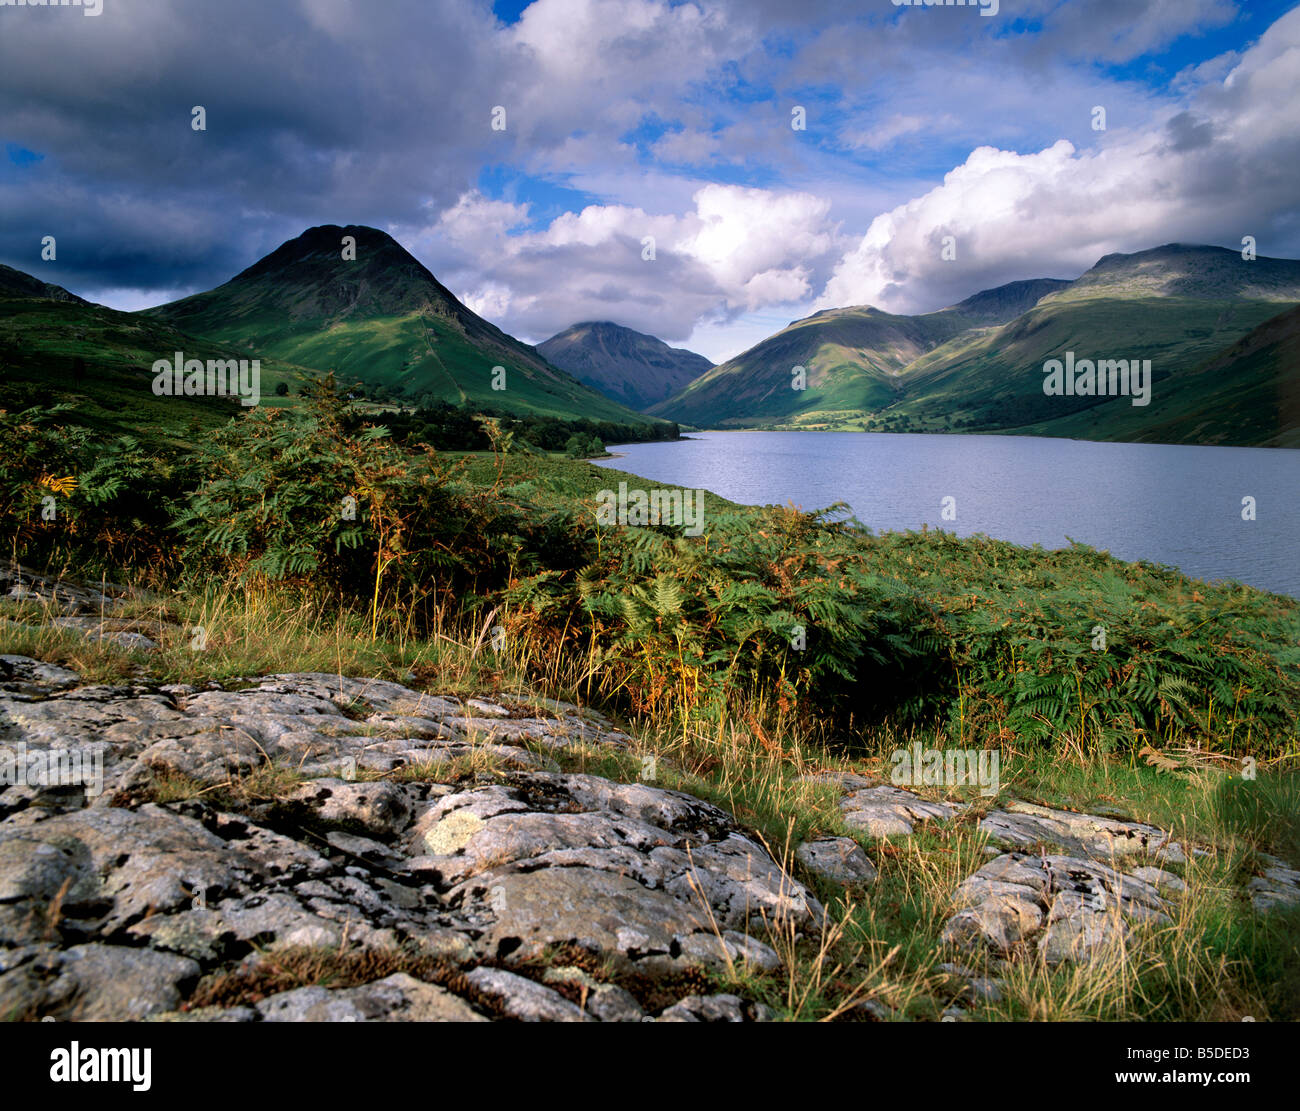 Wast Water and Yewbarrow, 627m, Lake District National Park, Cumbria, England, Europe Stock Photo